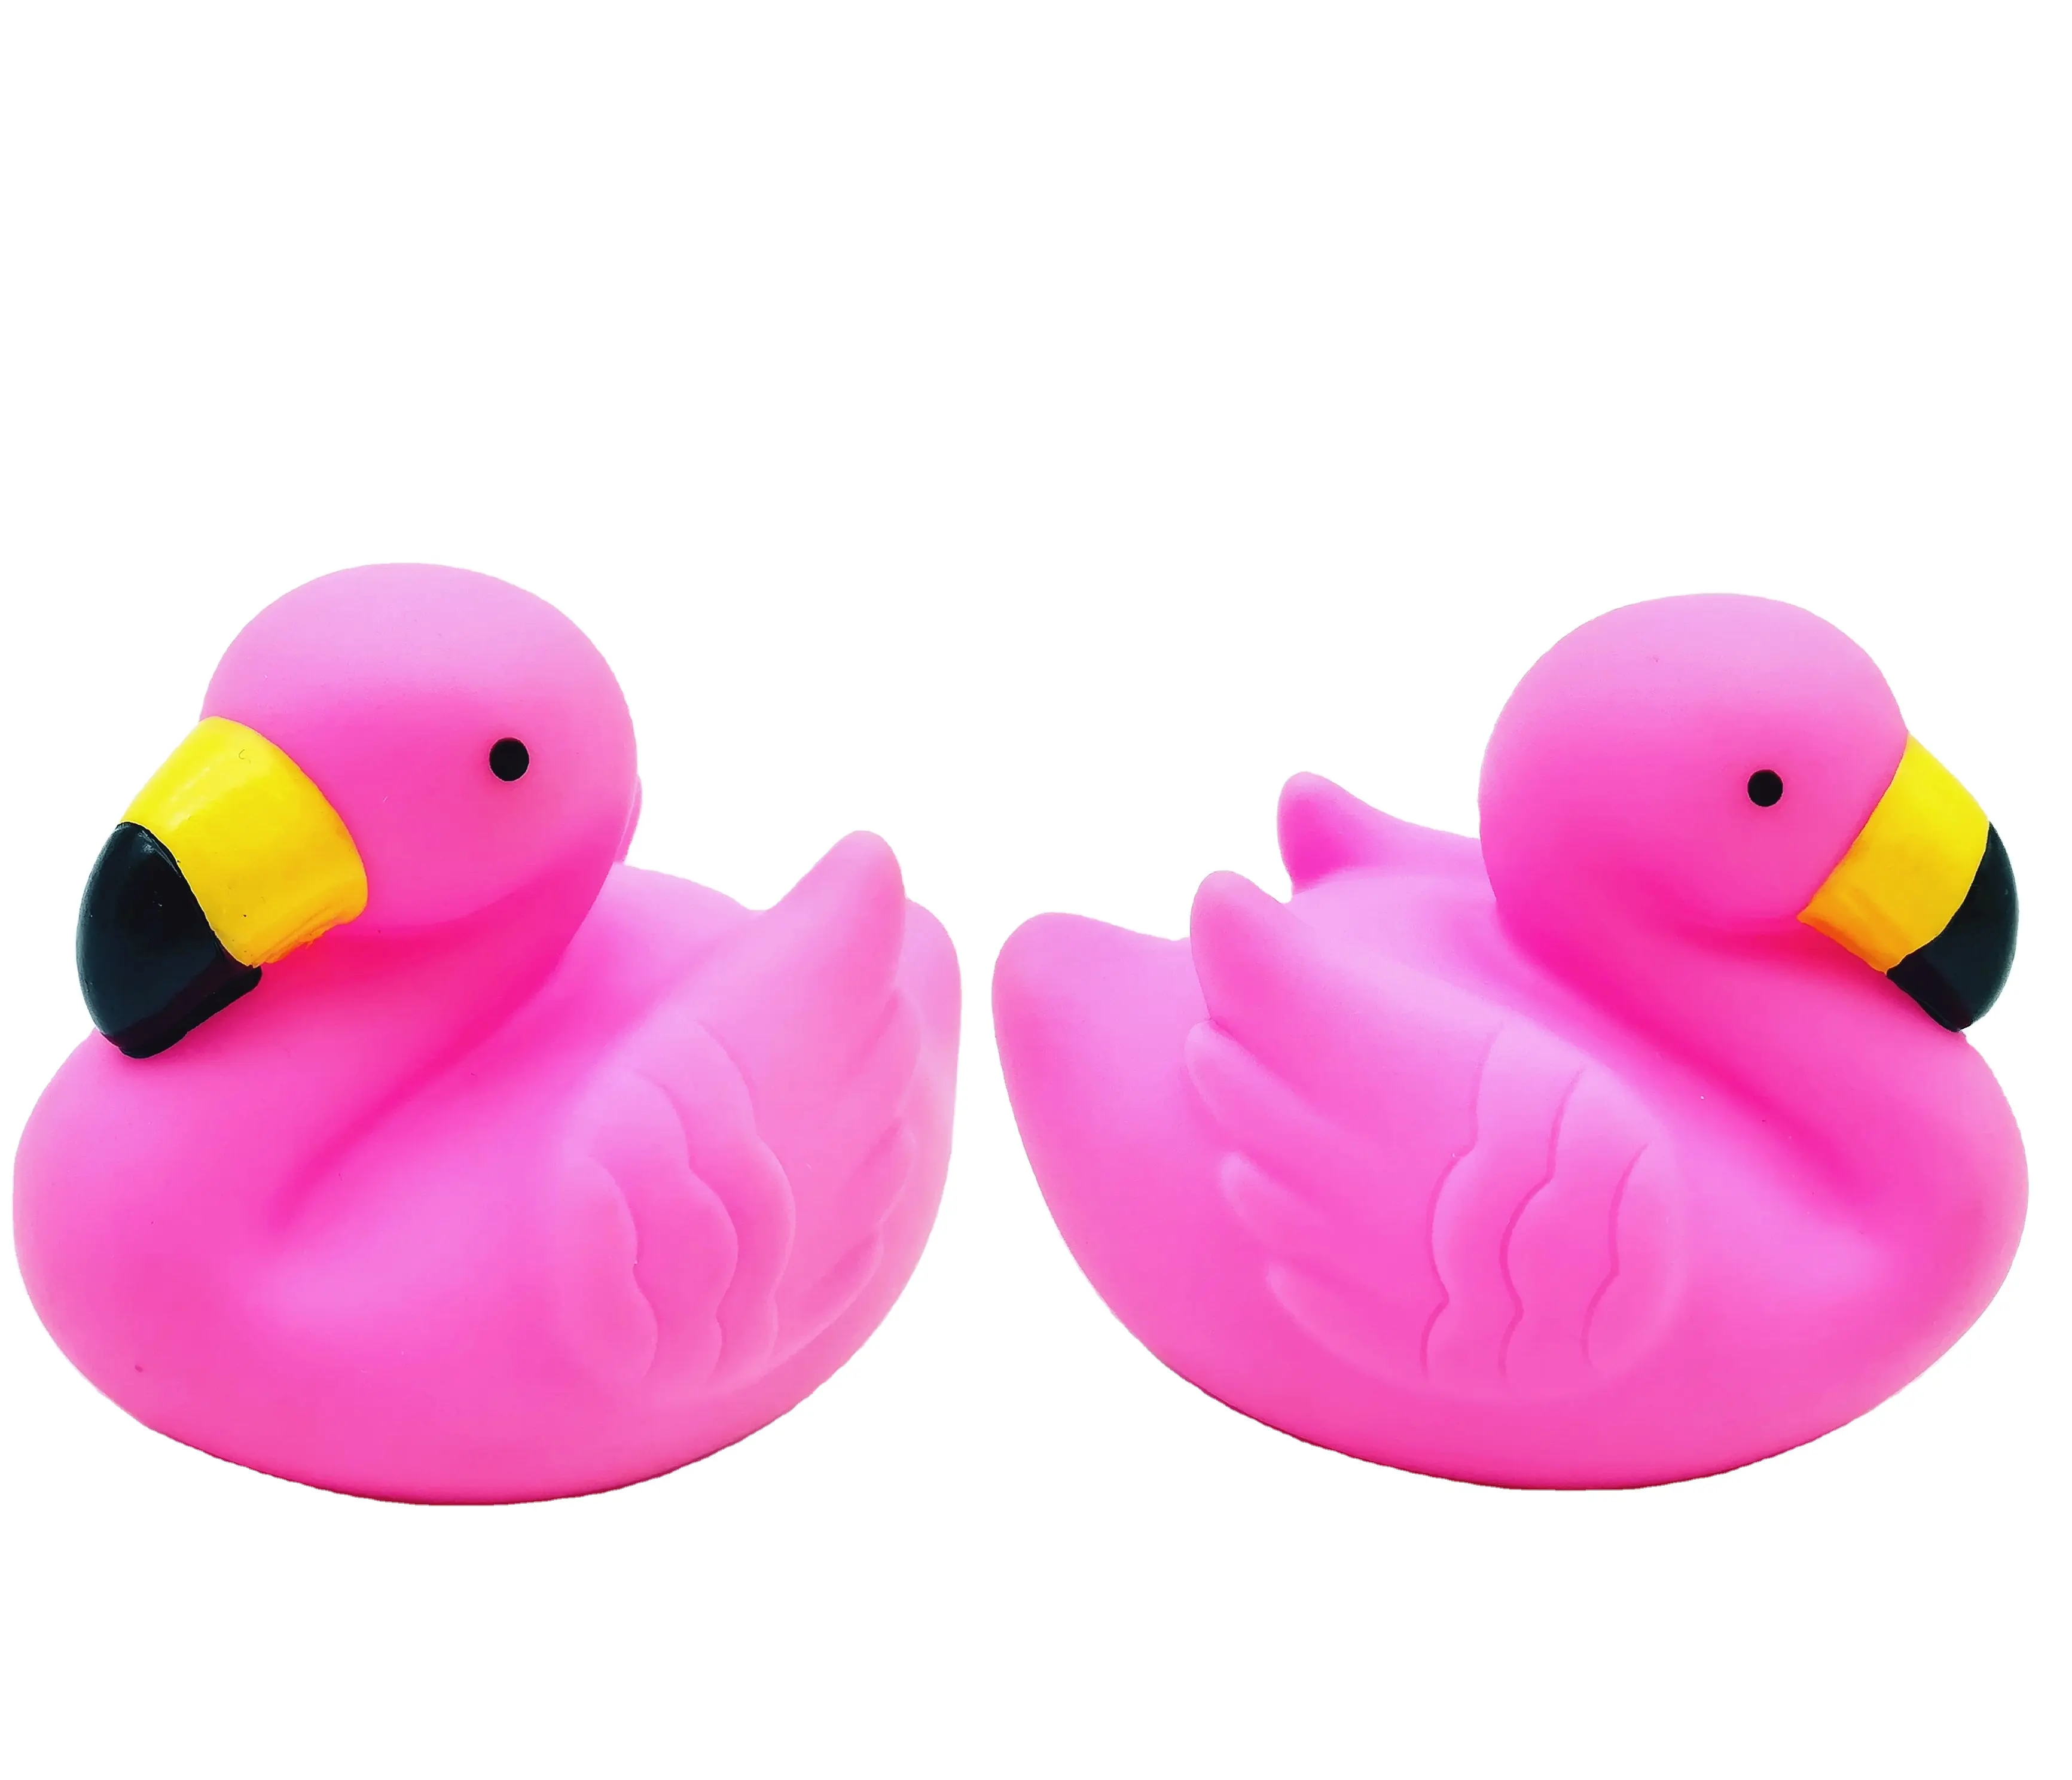 China Manufacturer Rubber Pink Flamingo Floating Squeaky Baby Bath Animal Toy for Kids Bathtub Fun